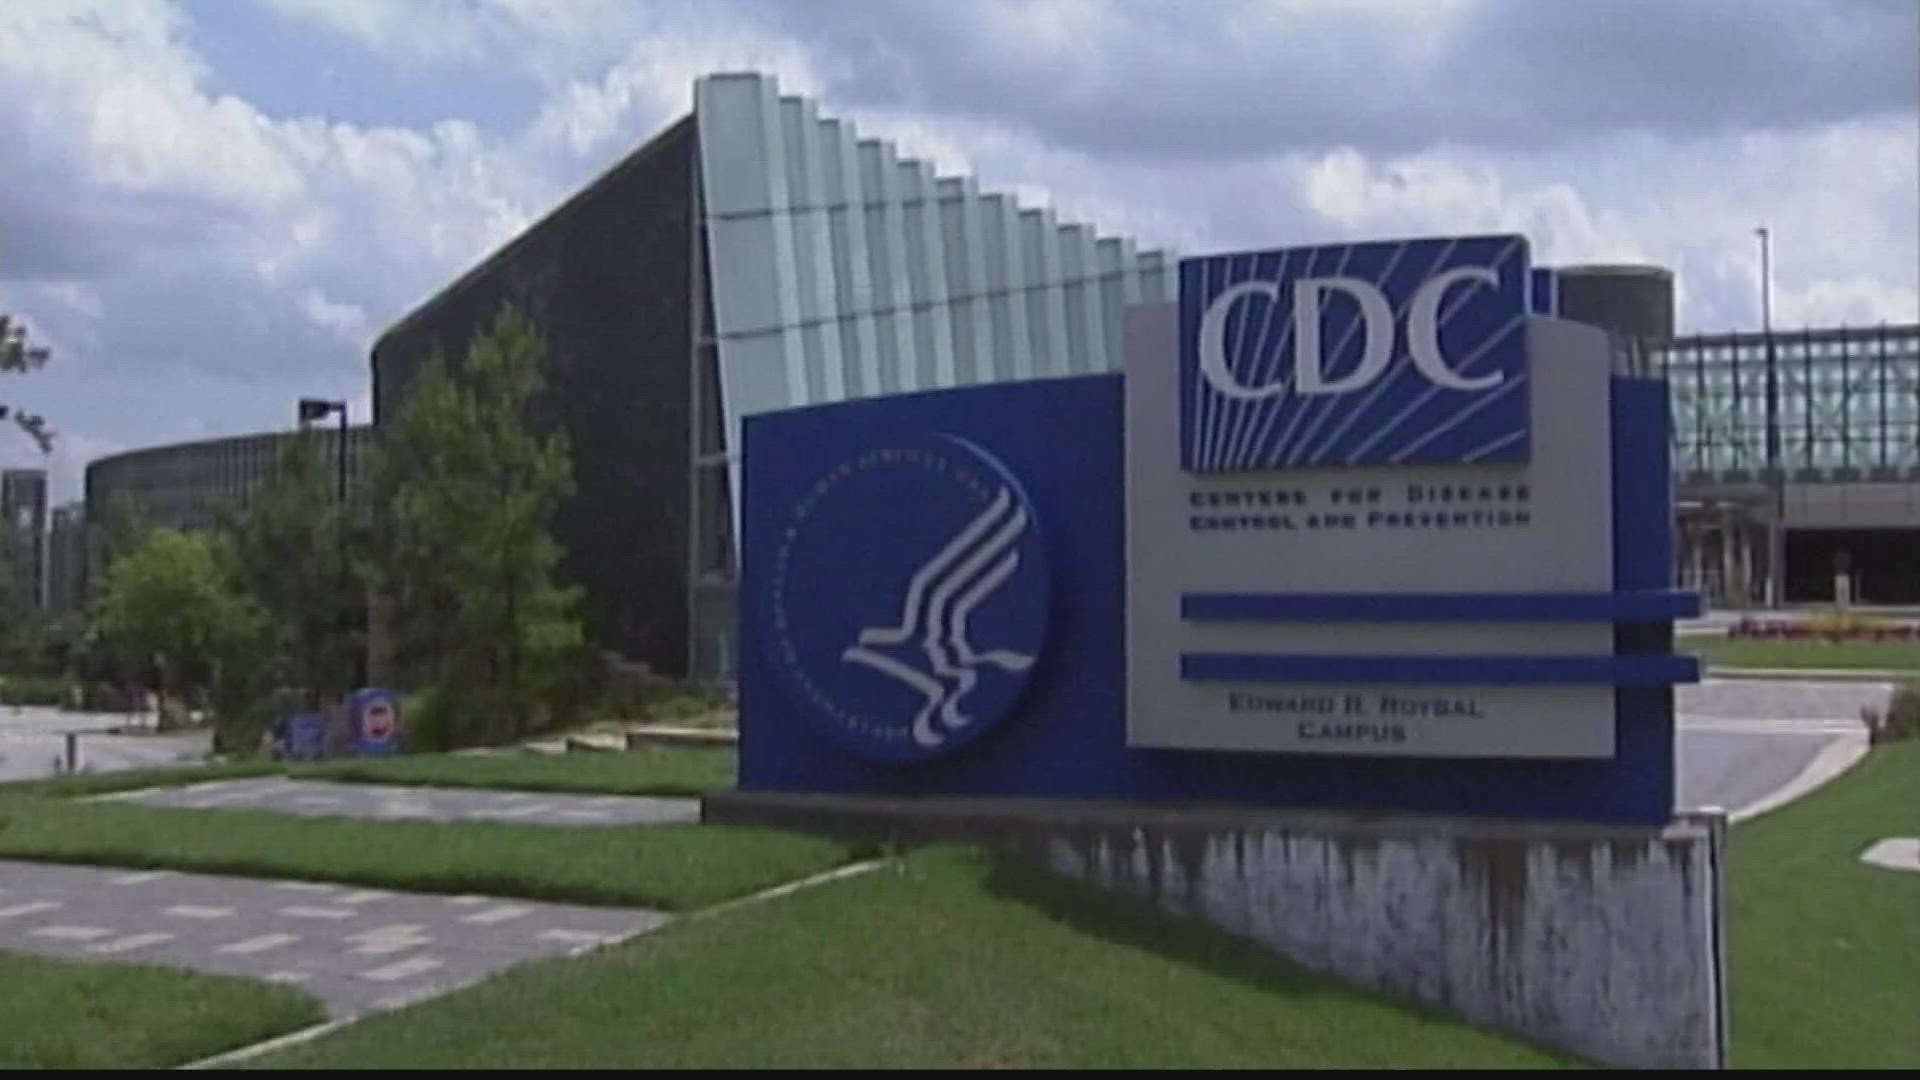 There's one confirmed case of the virus in Georgia, according to the agency.